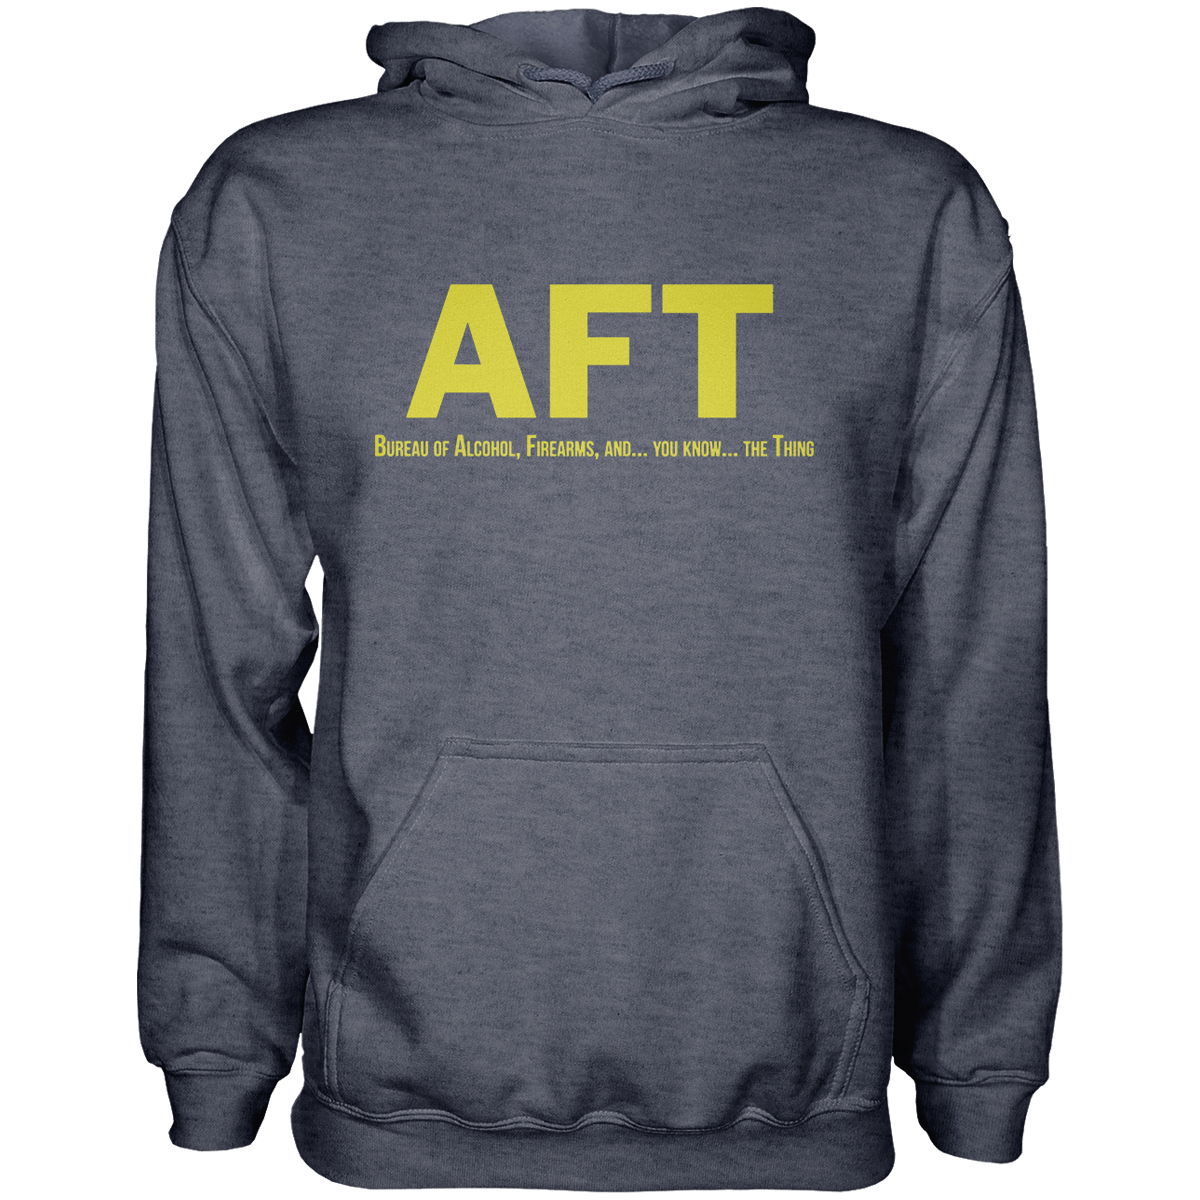 Thumbnail for AFT Hoodie - Greater Half